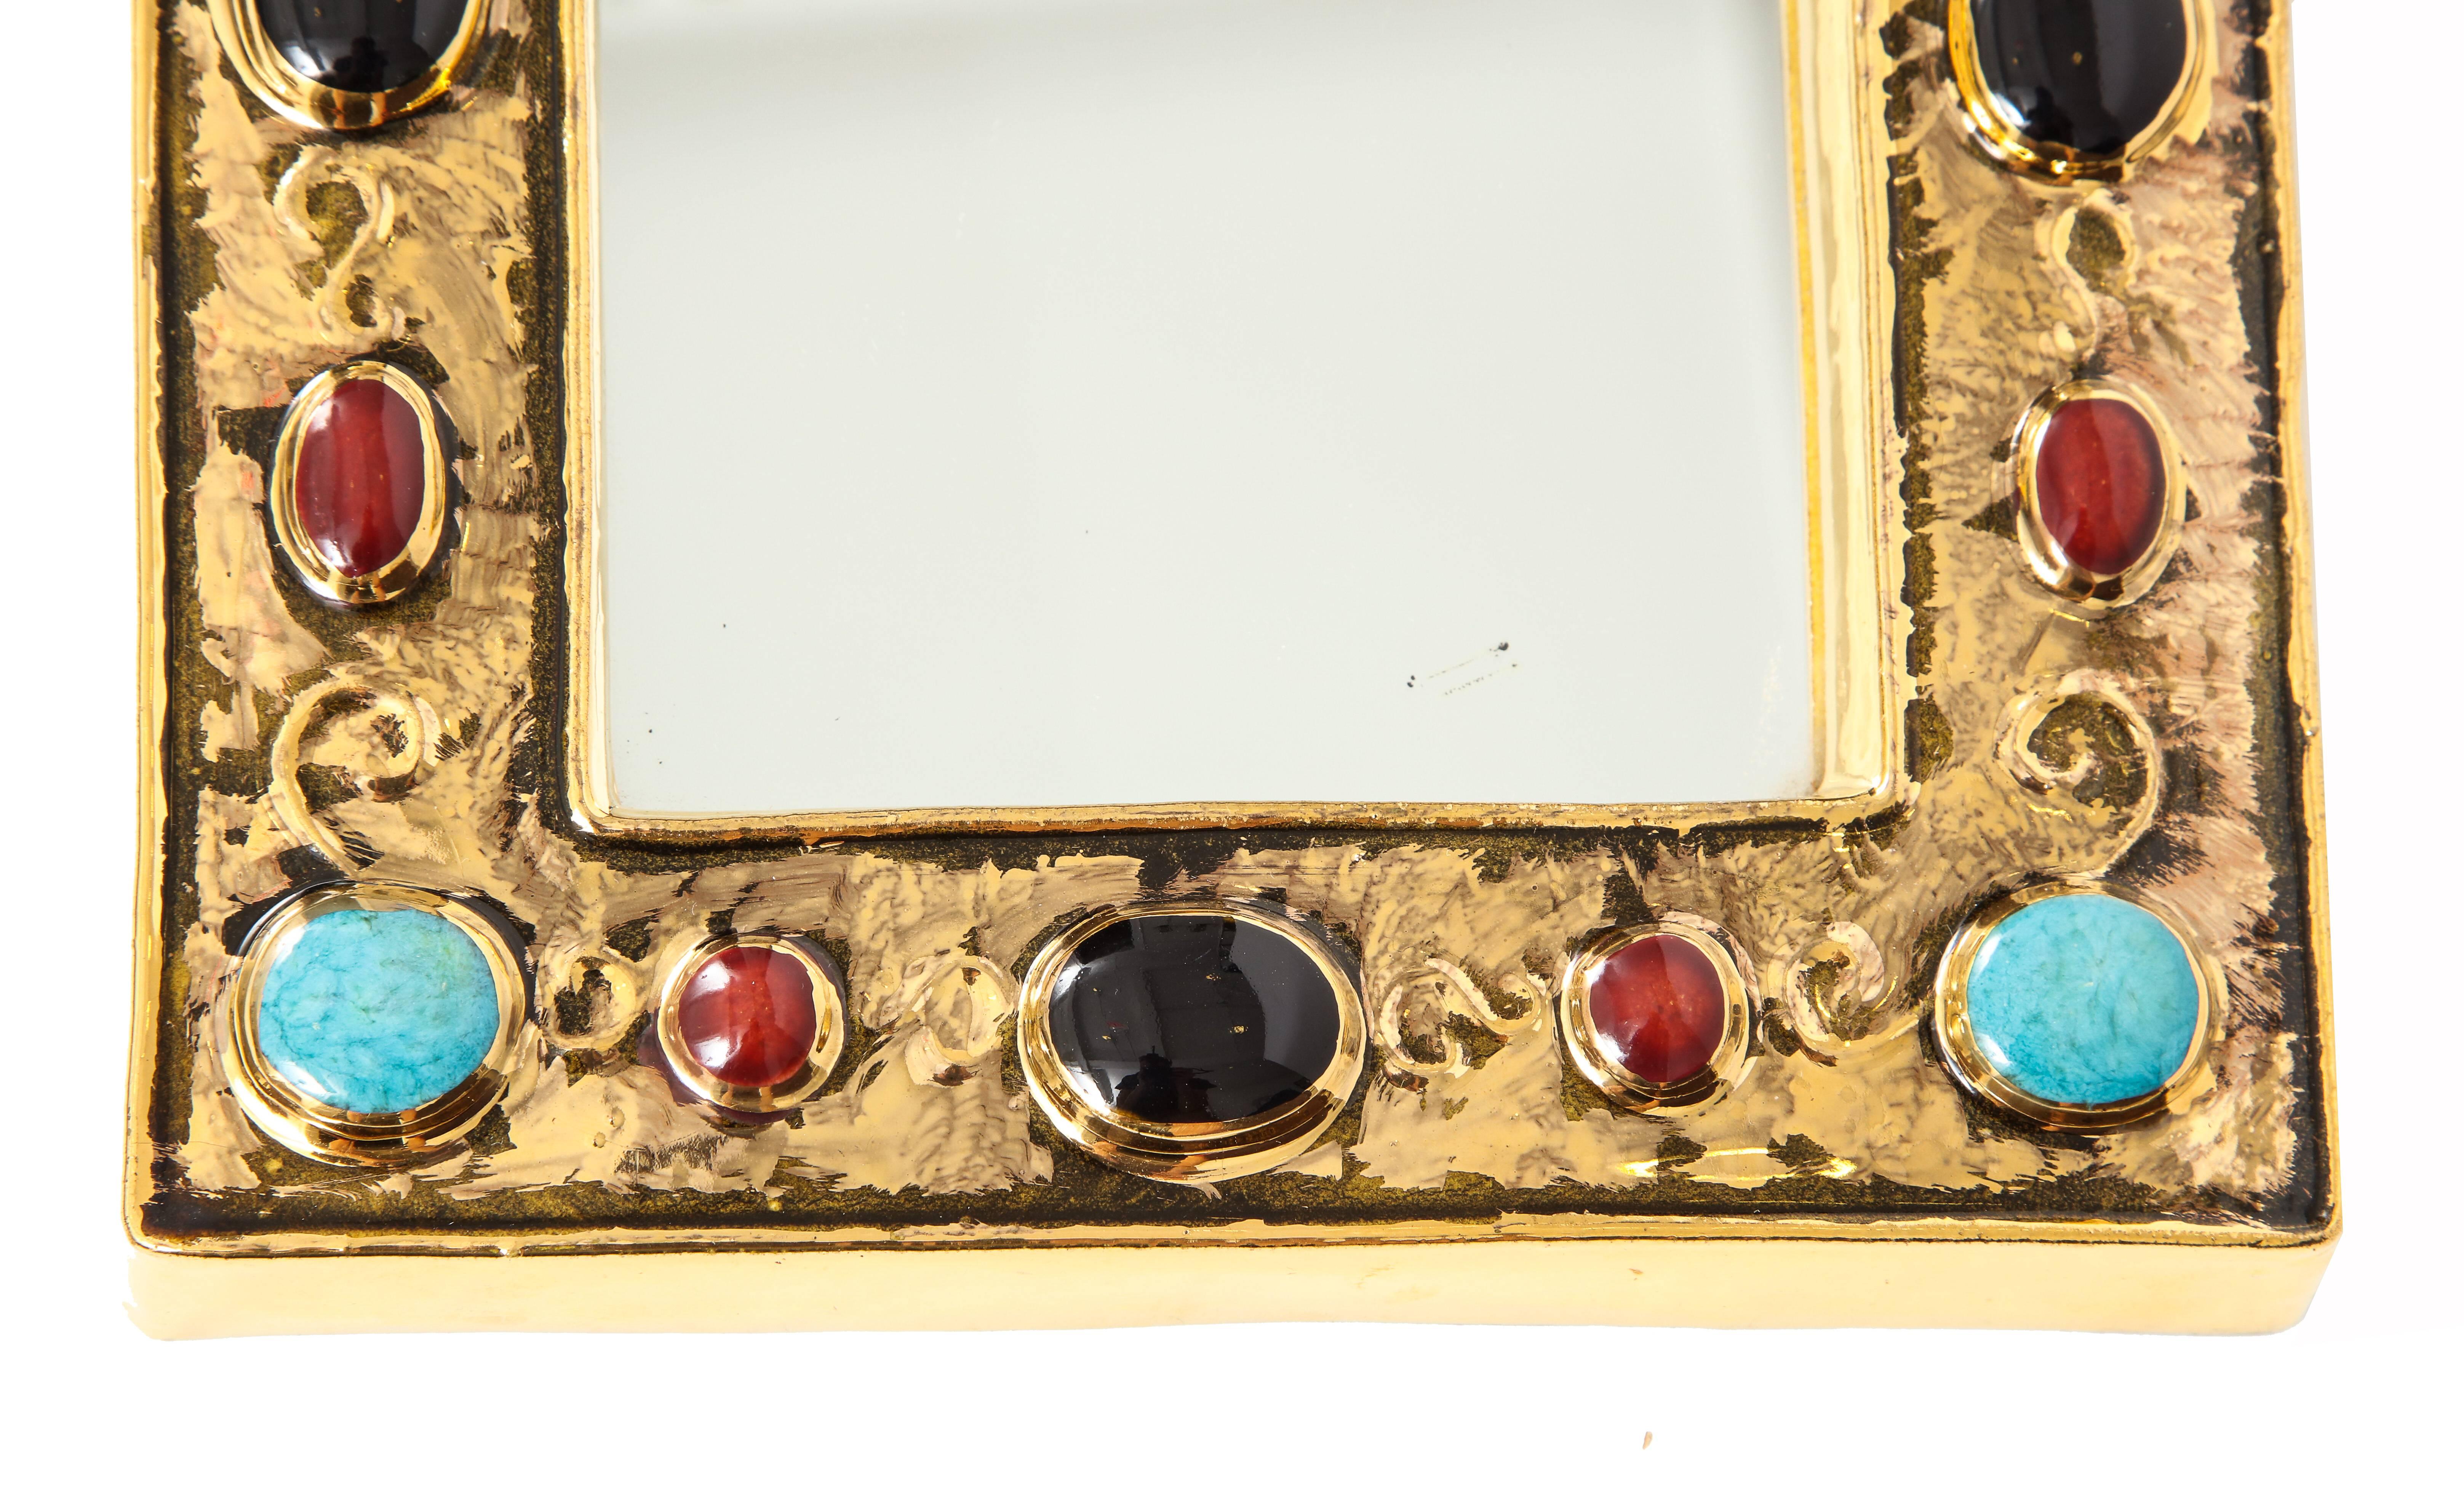 French Francois Lembo Mirror, Ceramic, Gold, Turquoise, Black and Red, Jeweled, Signed